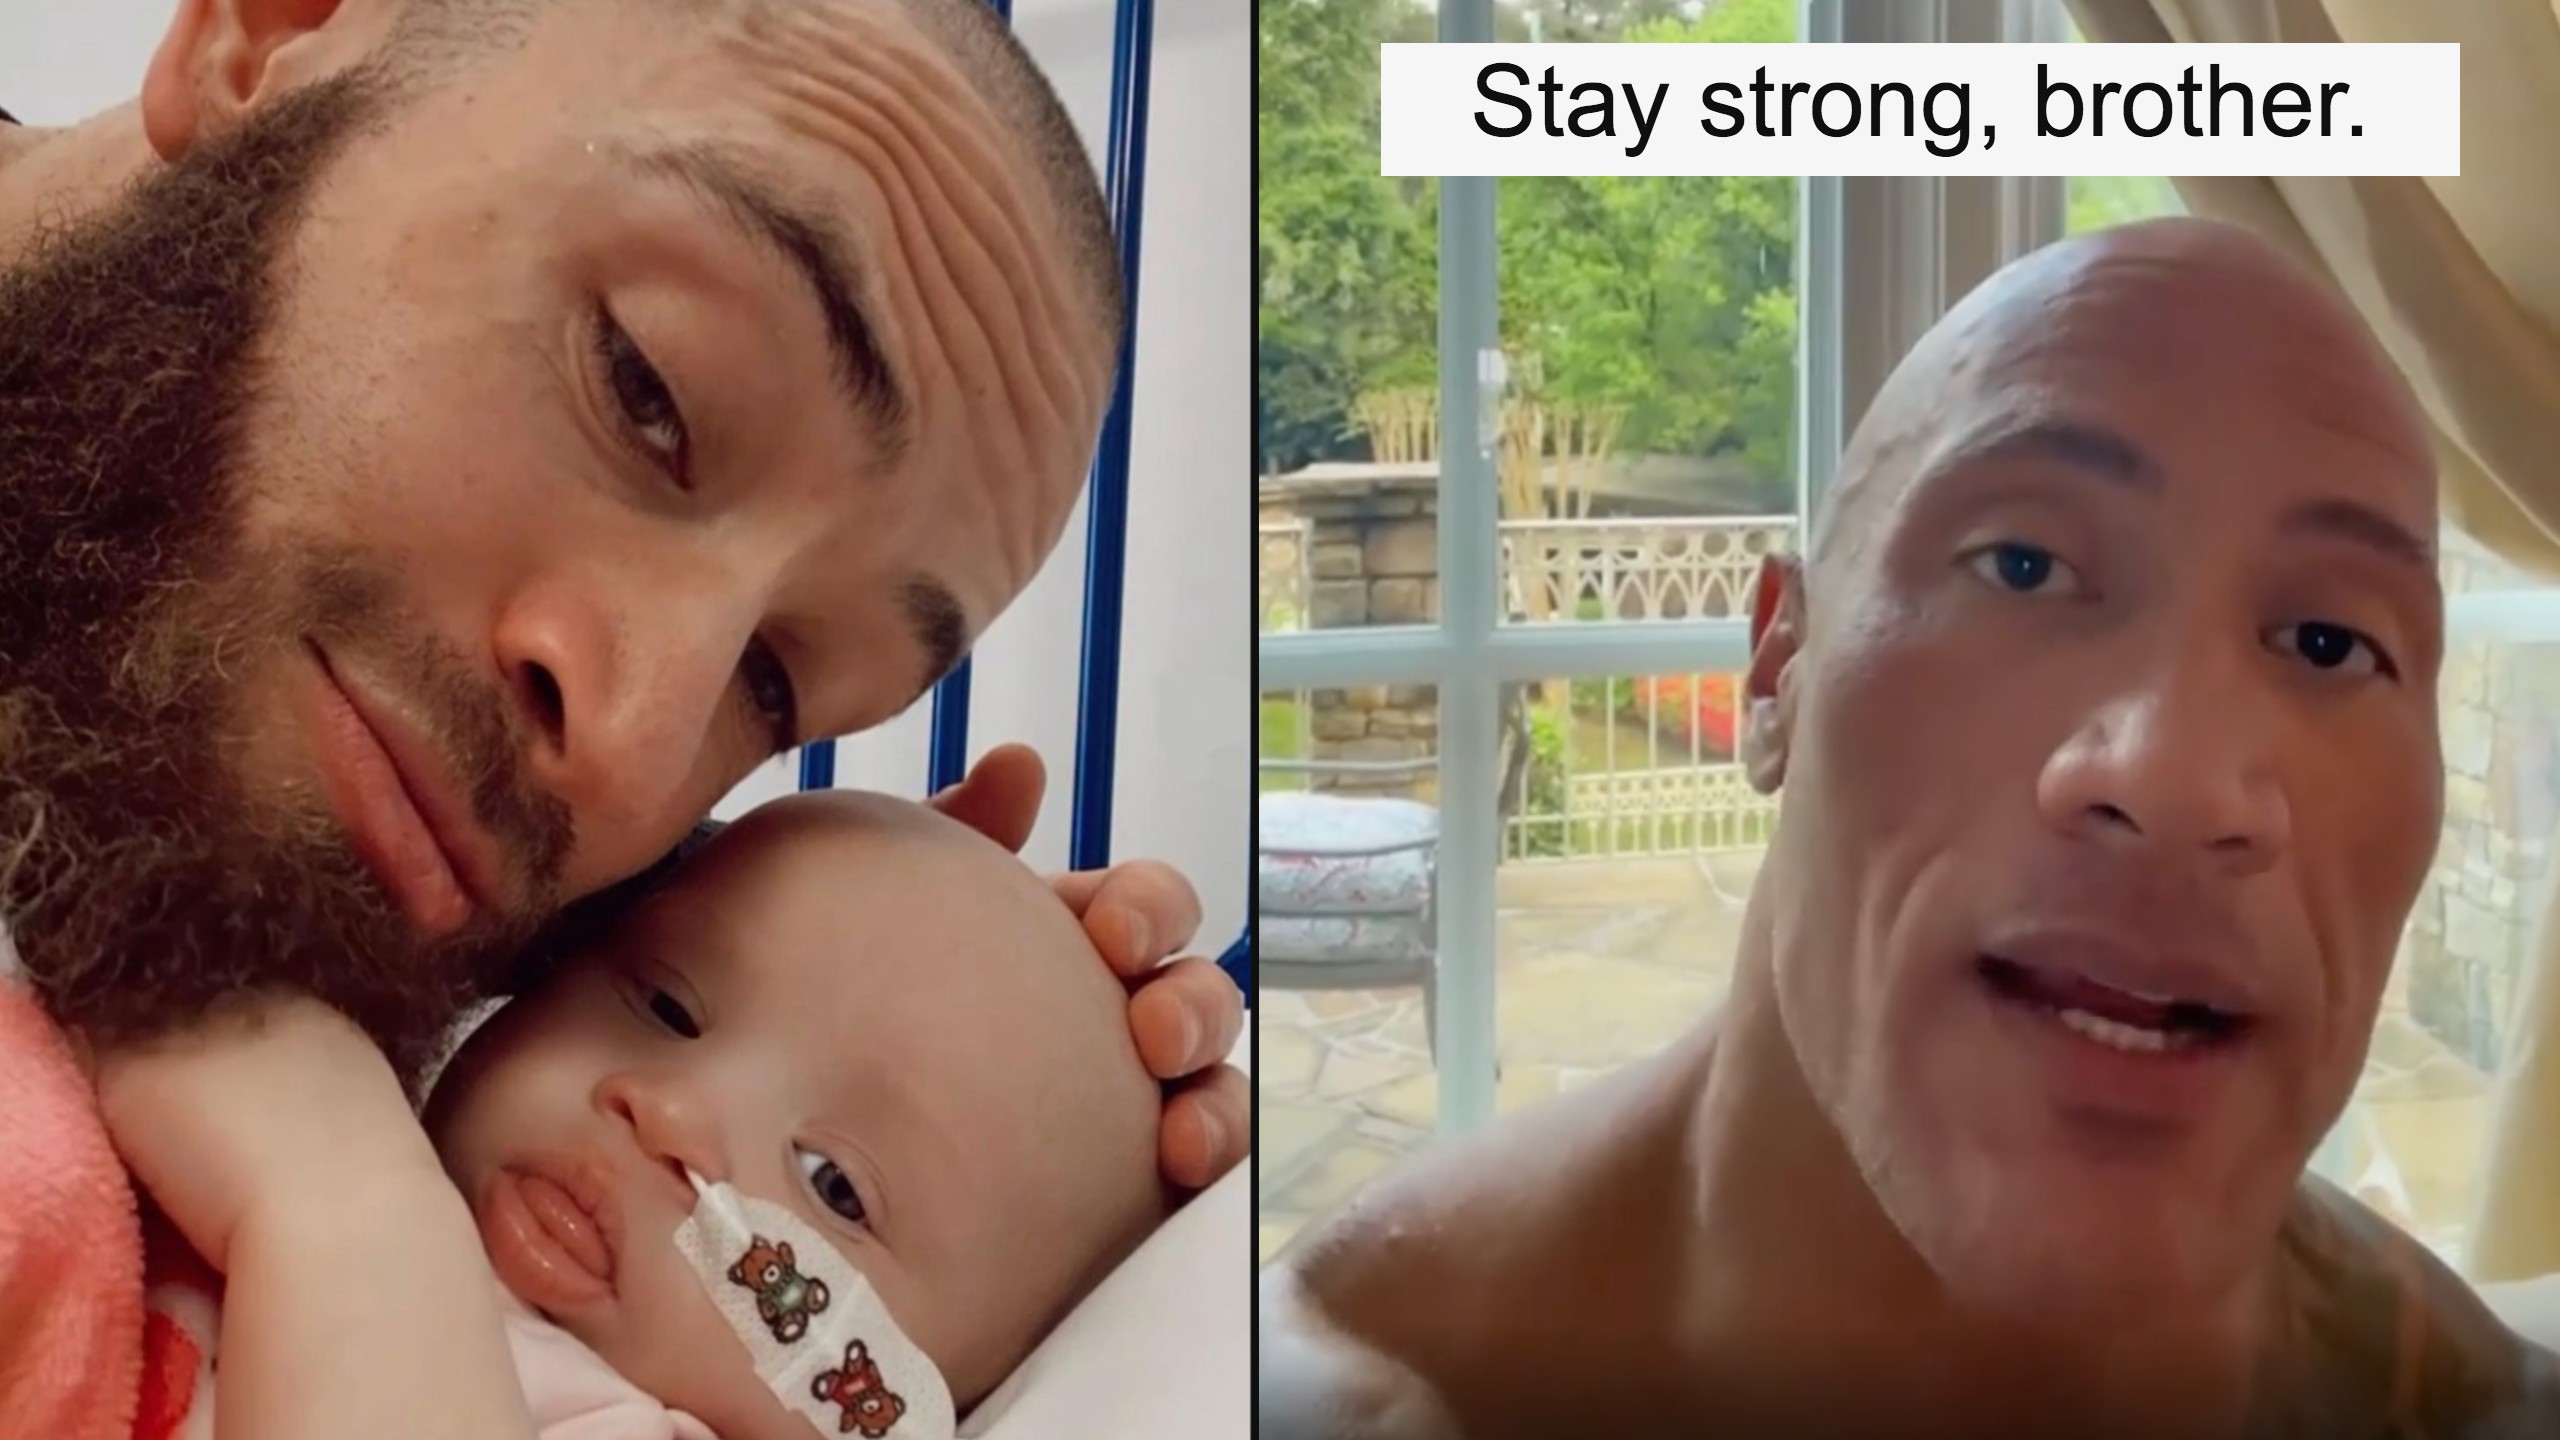 The Rock sends message of support to Ashley Cain during daughter's cancer battle